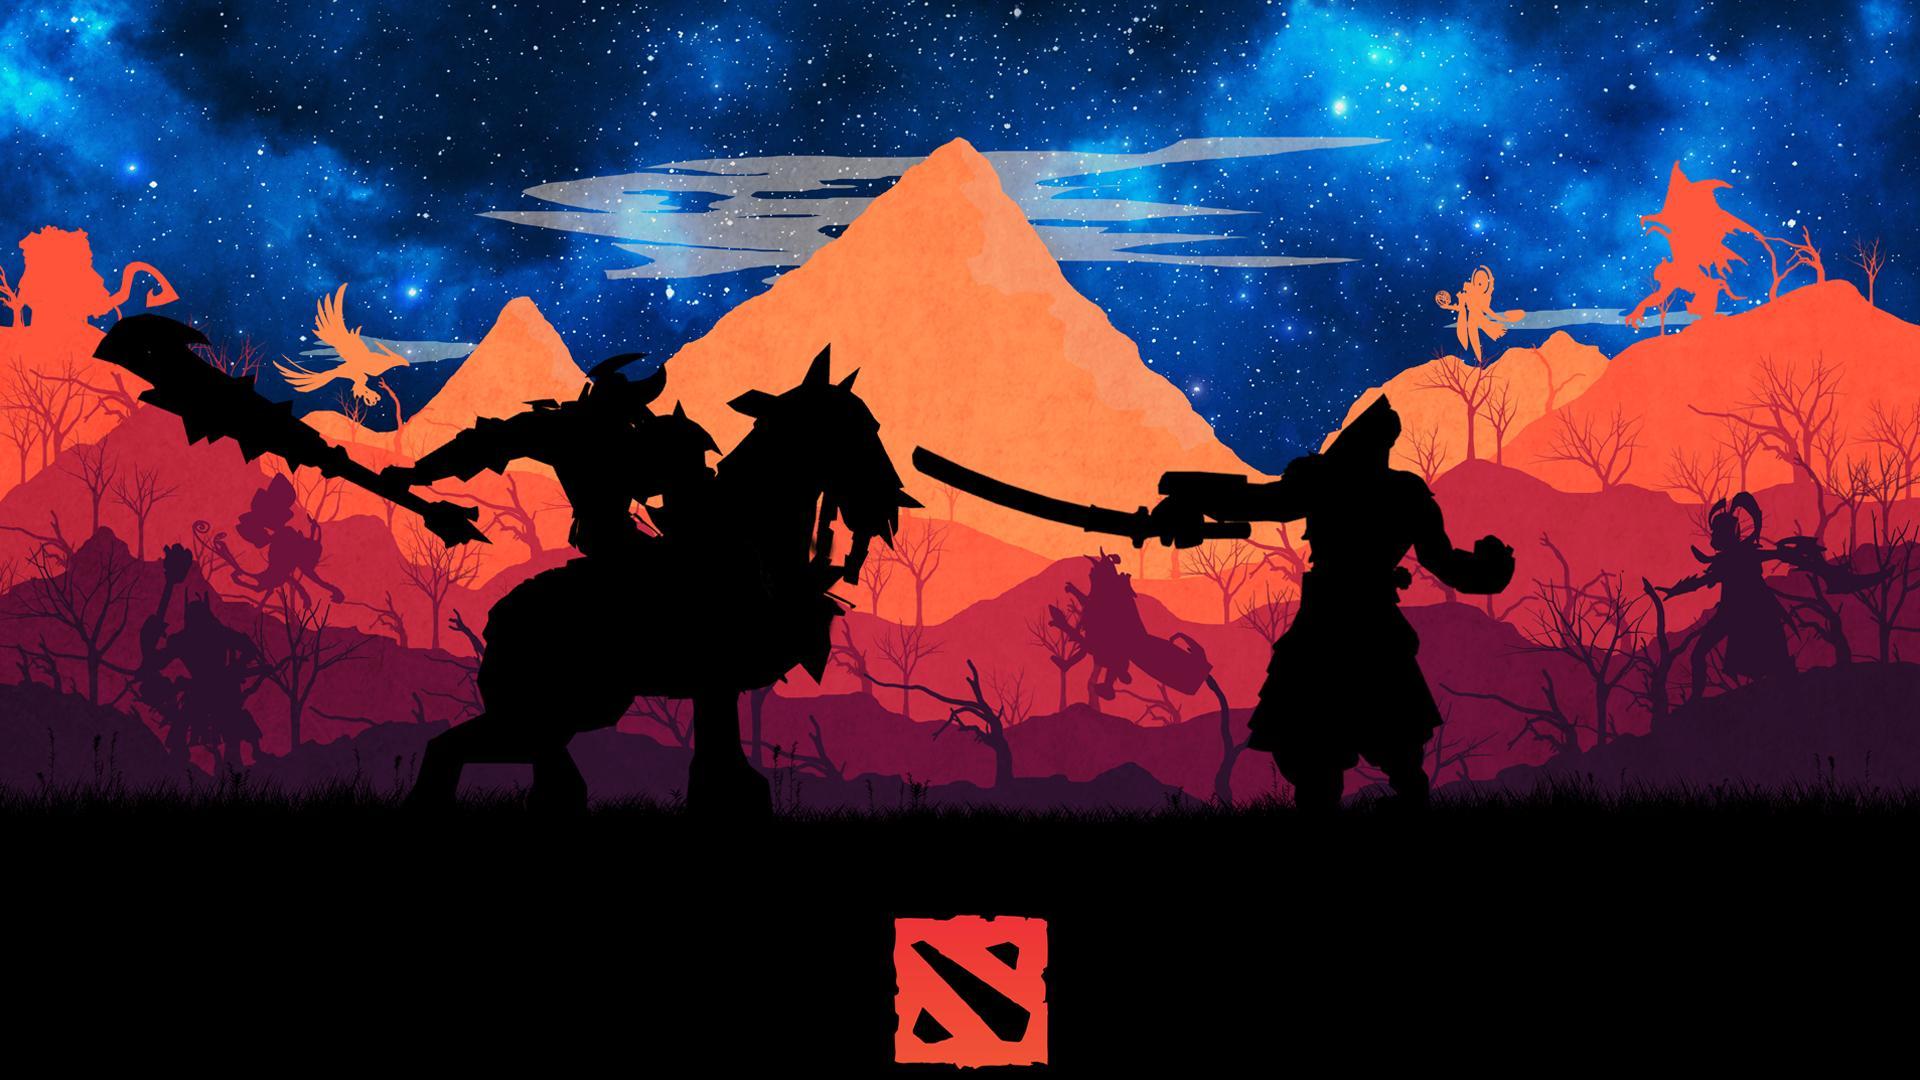 Looking for feedback on my first Dota 2 Wallpaper